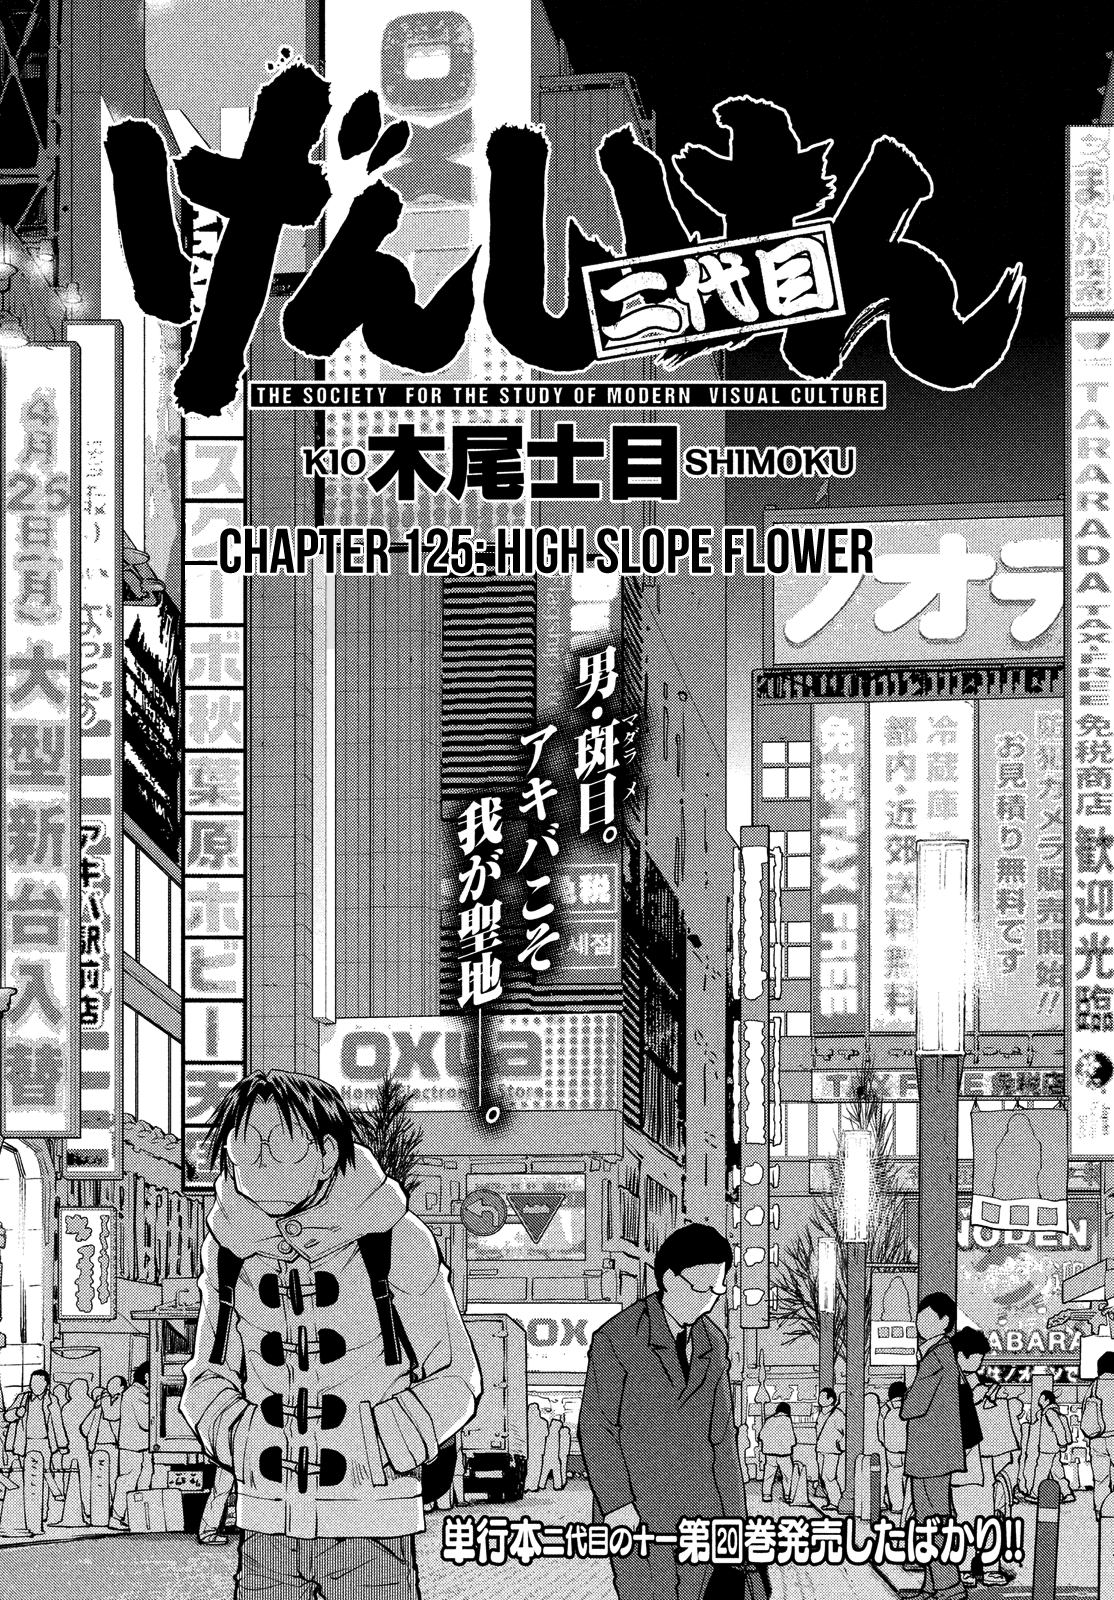 Genshiken Nidaime - The Society for the Study of Modern Visual Culture II Vol.21 Ch.125